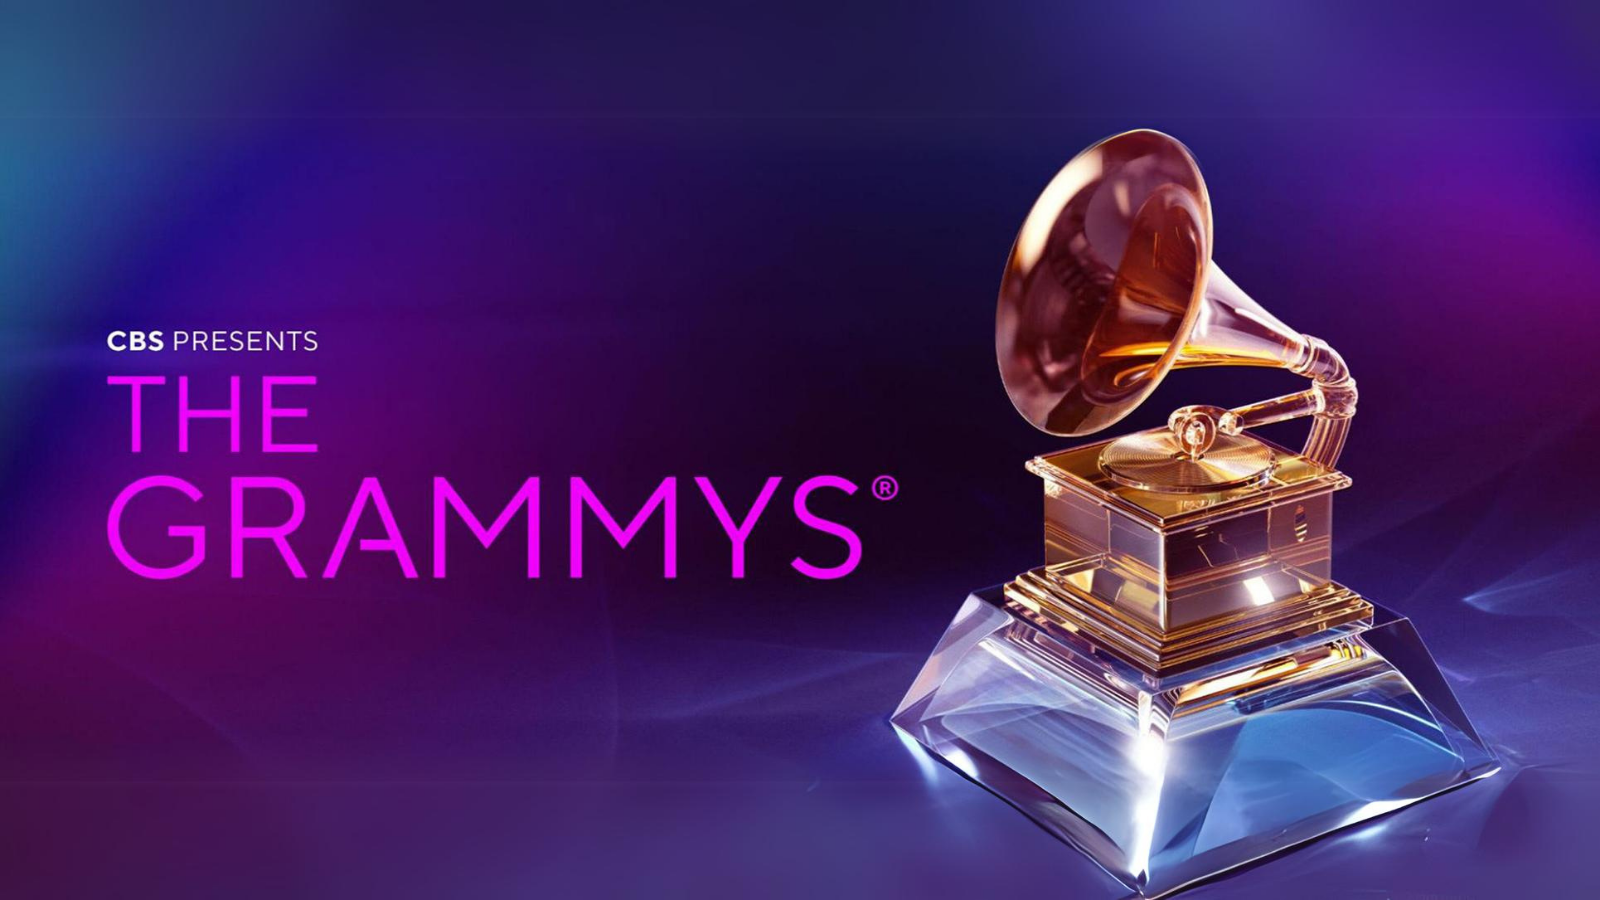 The Grammys ad with Grammy trophy on purple gradient background